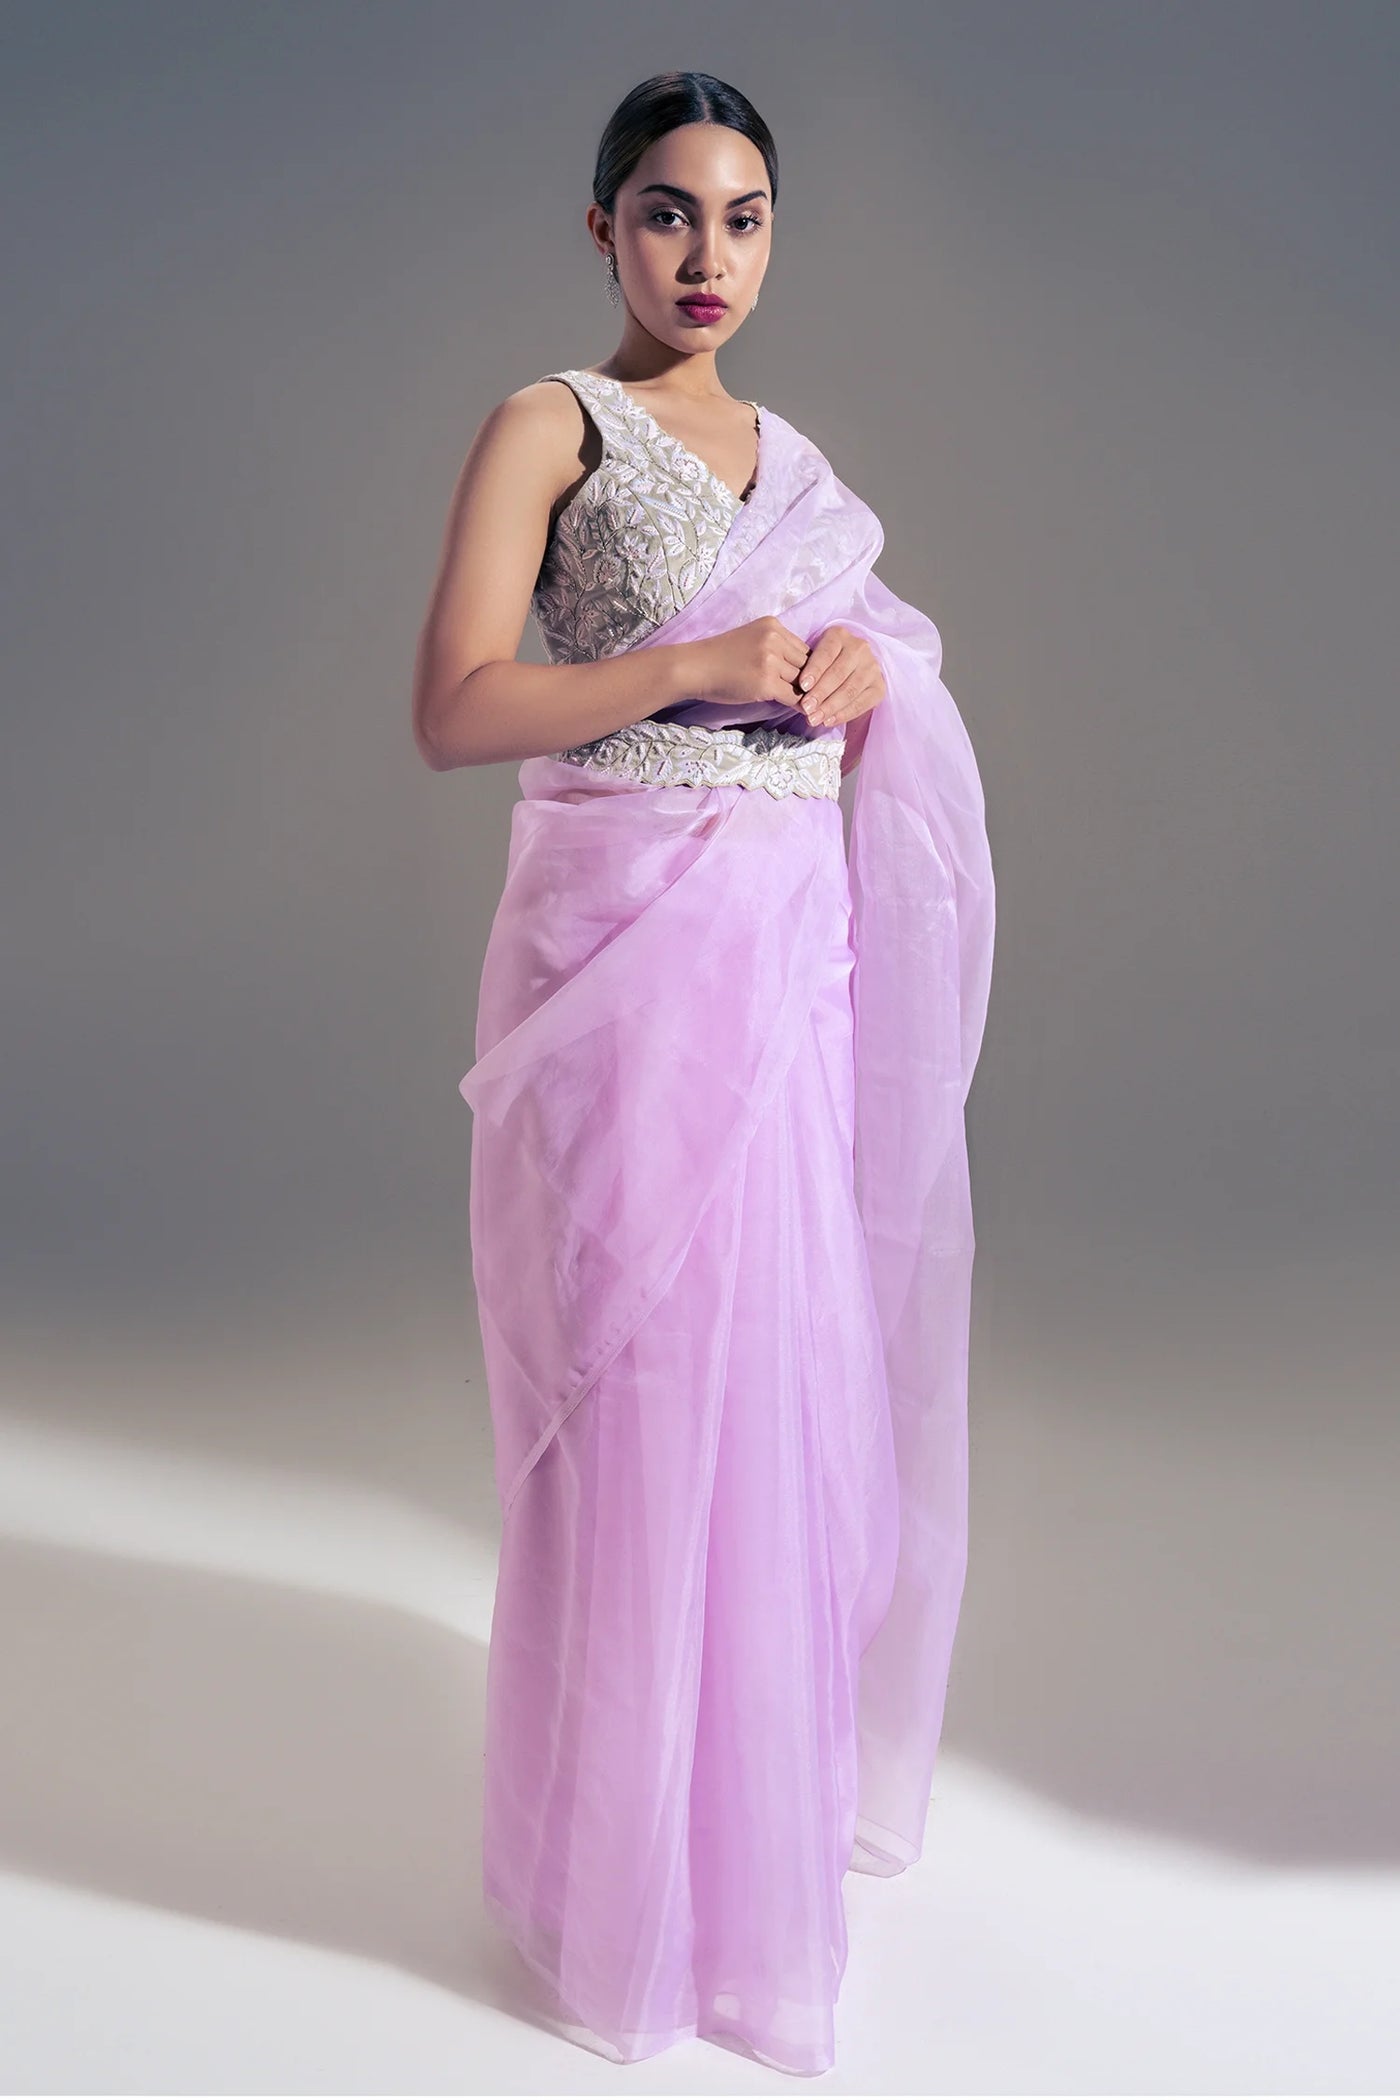 Purple Suede Organza Saree - Indian Clothing in Denver, CO, Aurora, CO, Boulder, CO, Fort Collins, CO, Colorado Springs, CO, Parker, CO, Highlands Ranch, CO, Cherry Creek, CO, Centennial, CO, and Longmont, CO. Nationwide shipping USA - India Fashion X